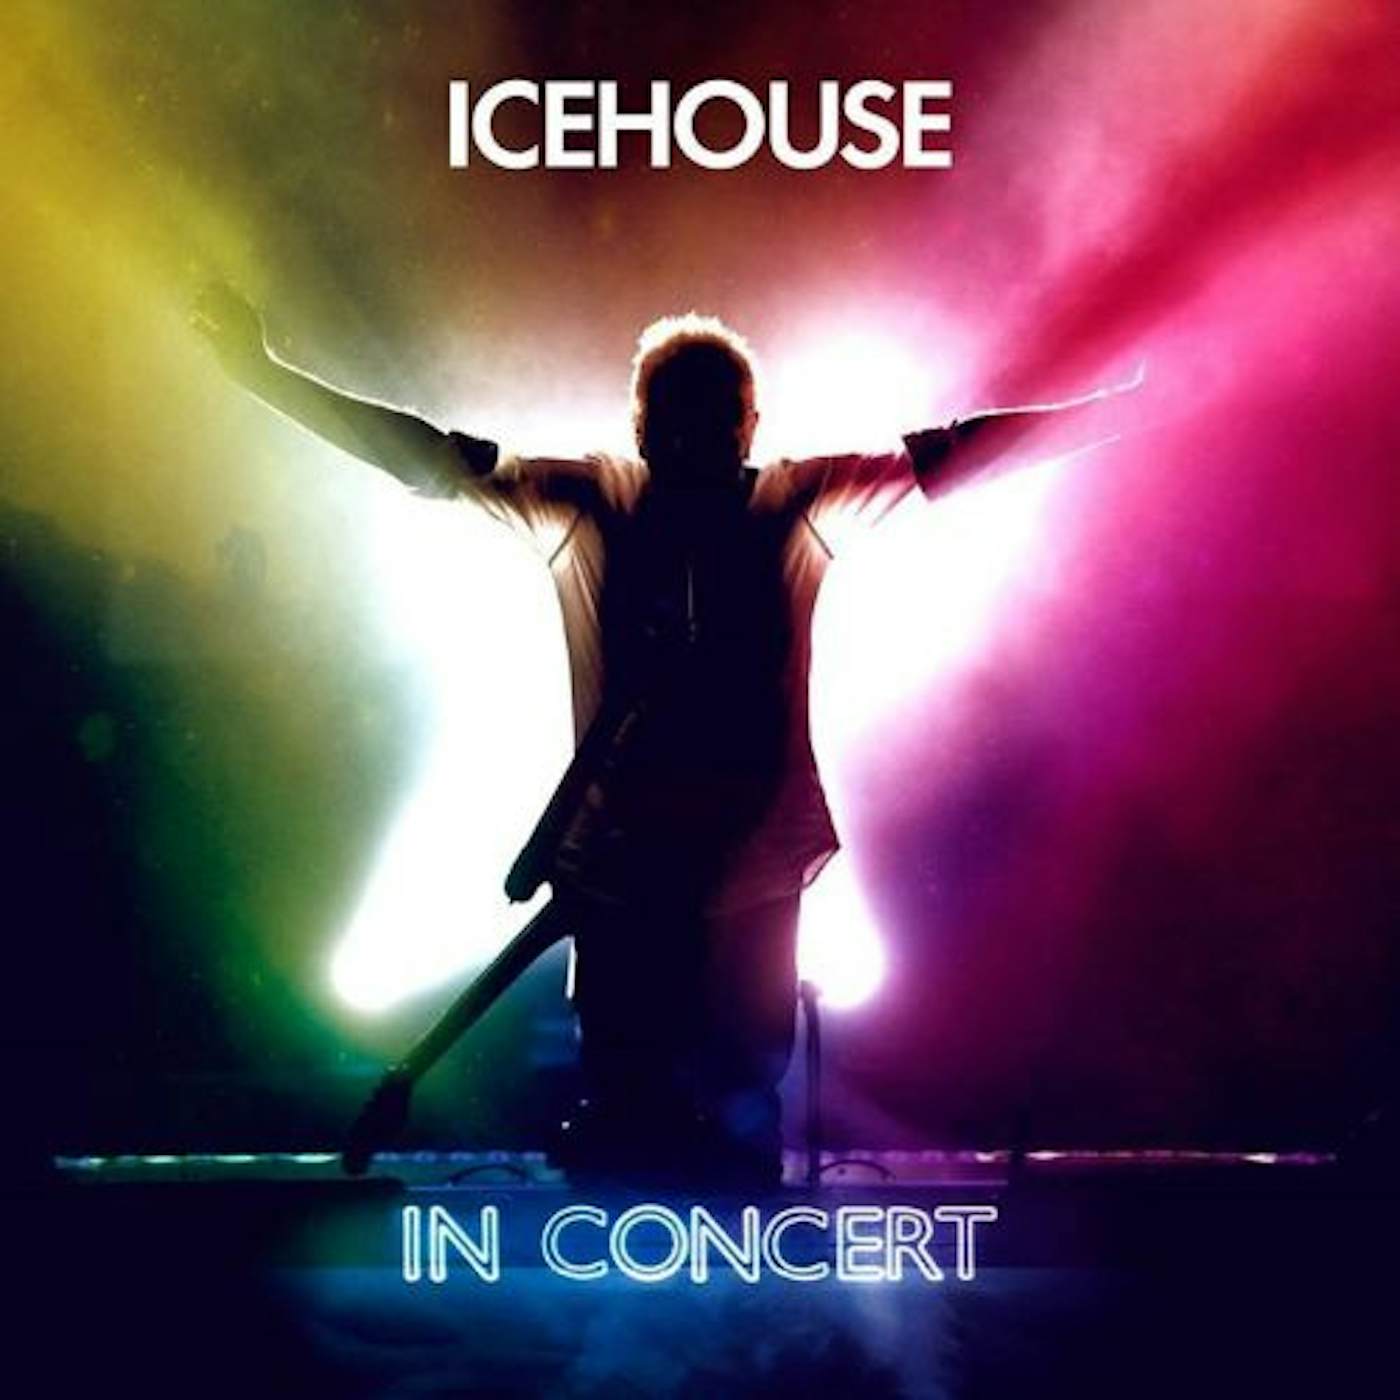 ICEHOUSE IN CONCERT Vinyl Record